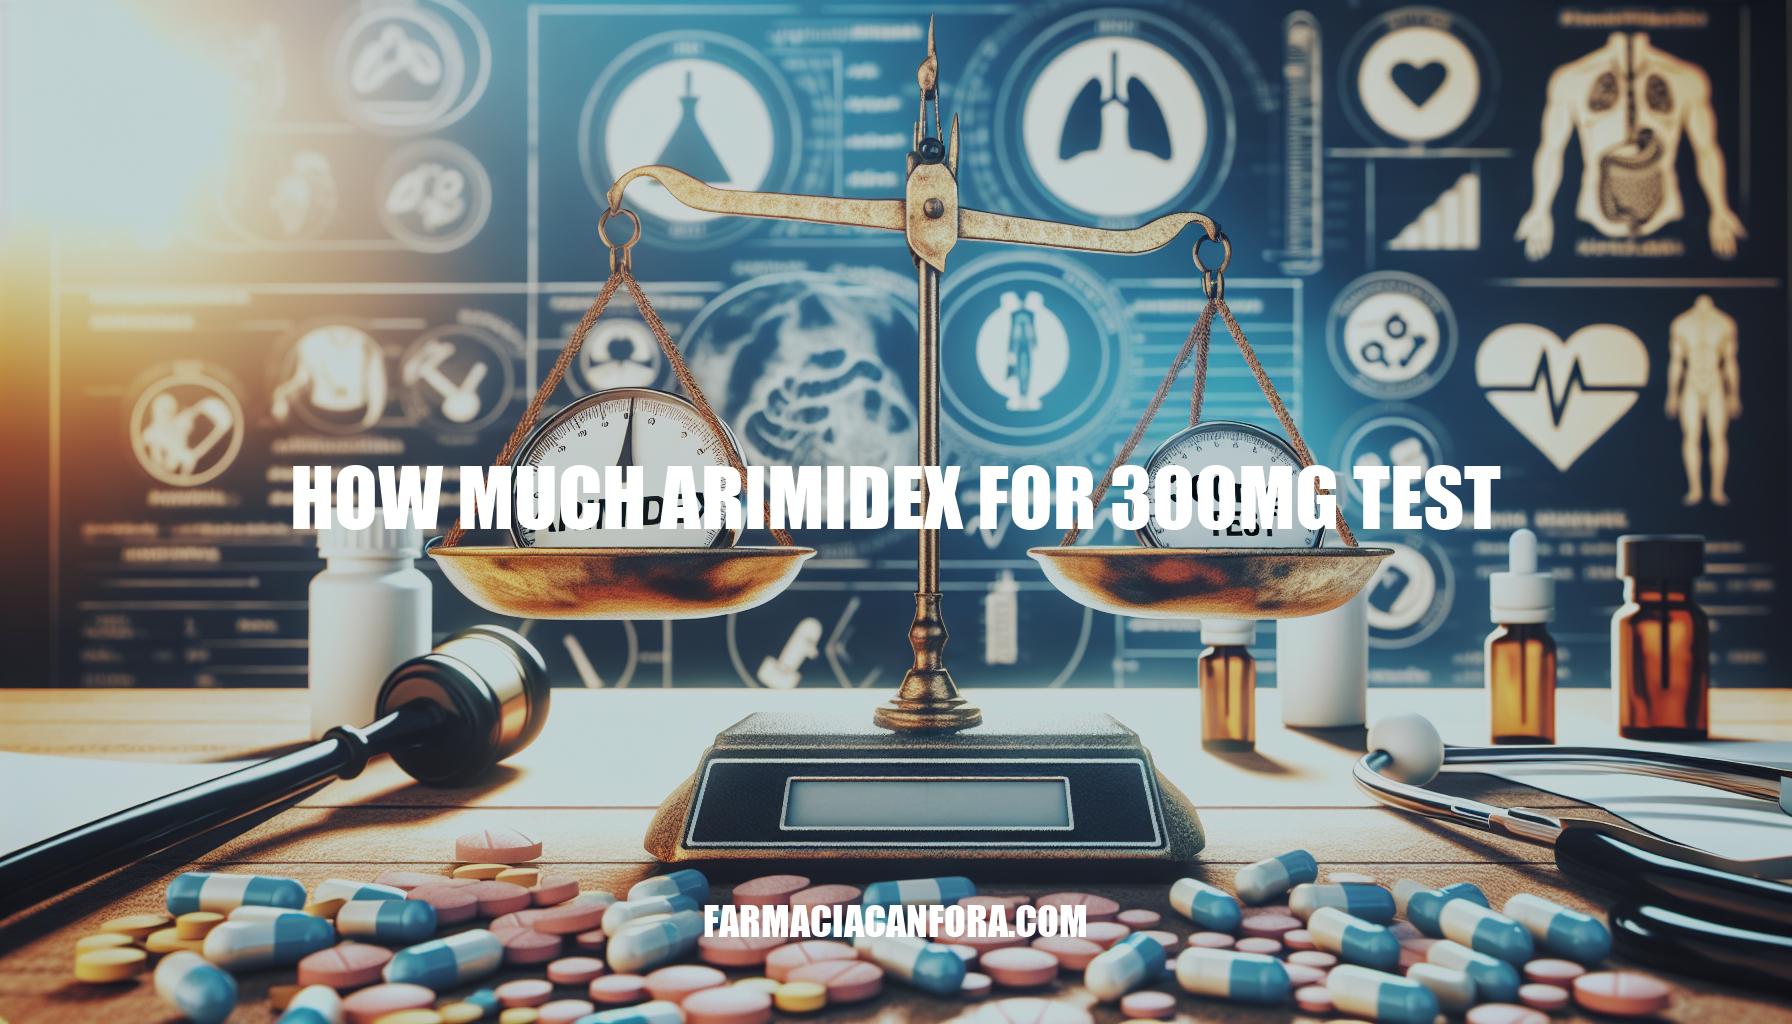 How Much Arimidex for 300mg Test: Dosage Guidelines